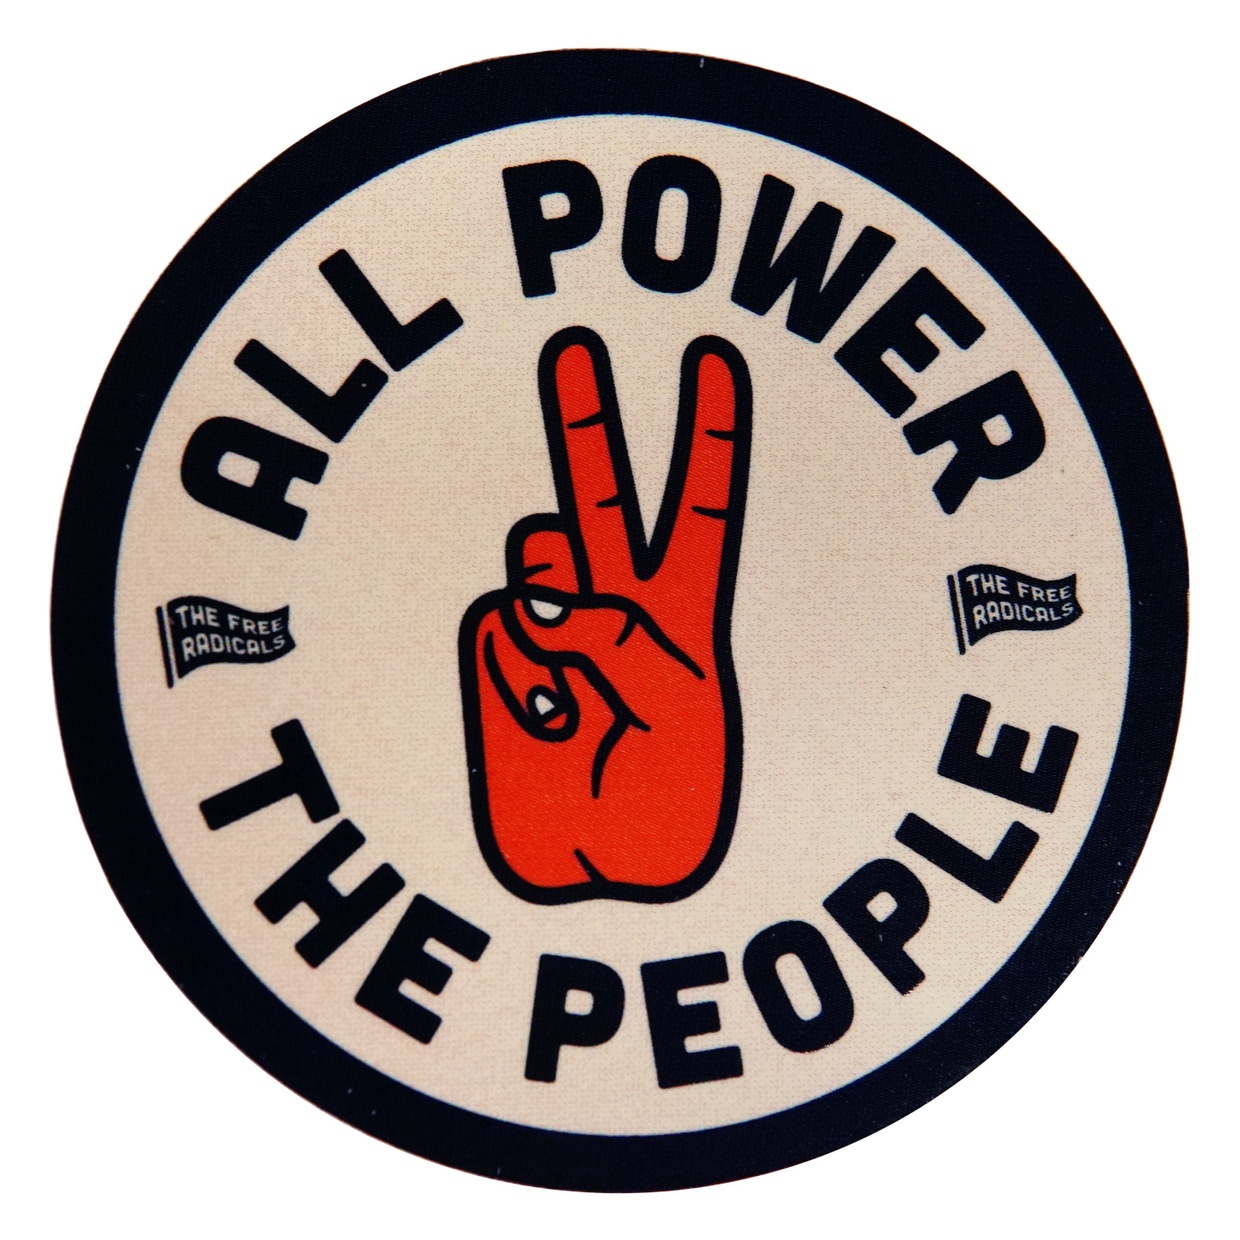 A circular white button with the words “All Power The People” and a red hand making a peace sign (that also acts as the word “to”) in the center.